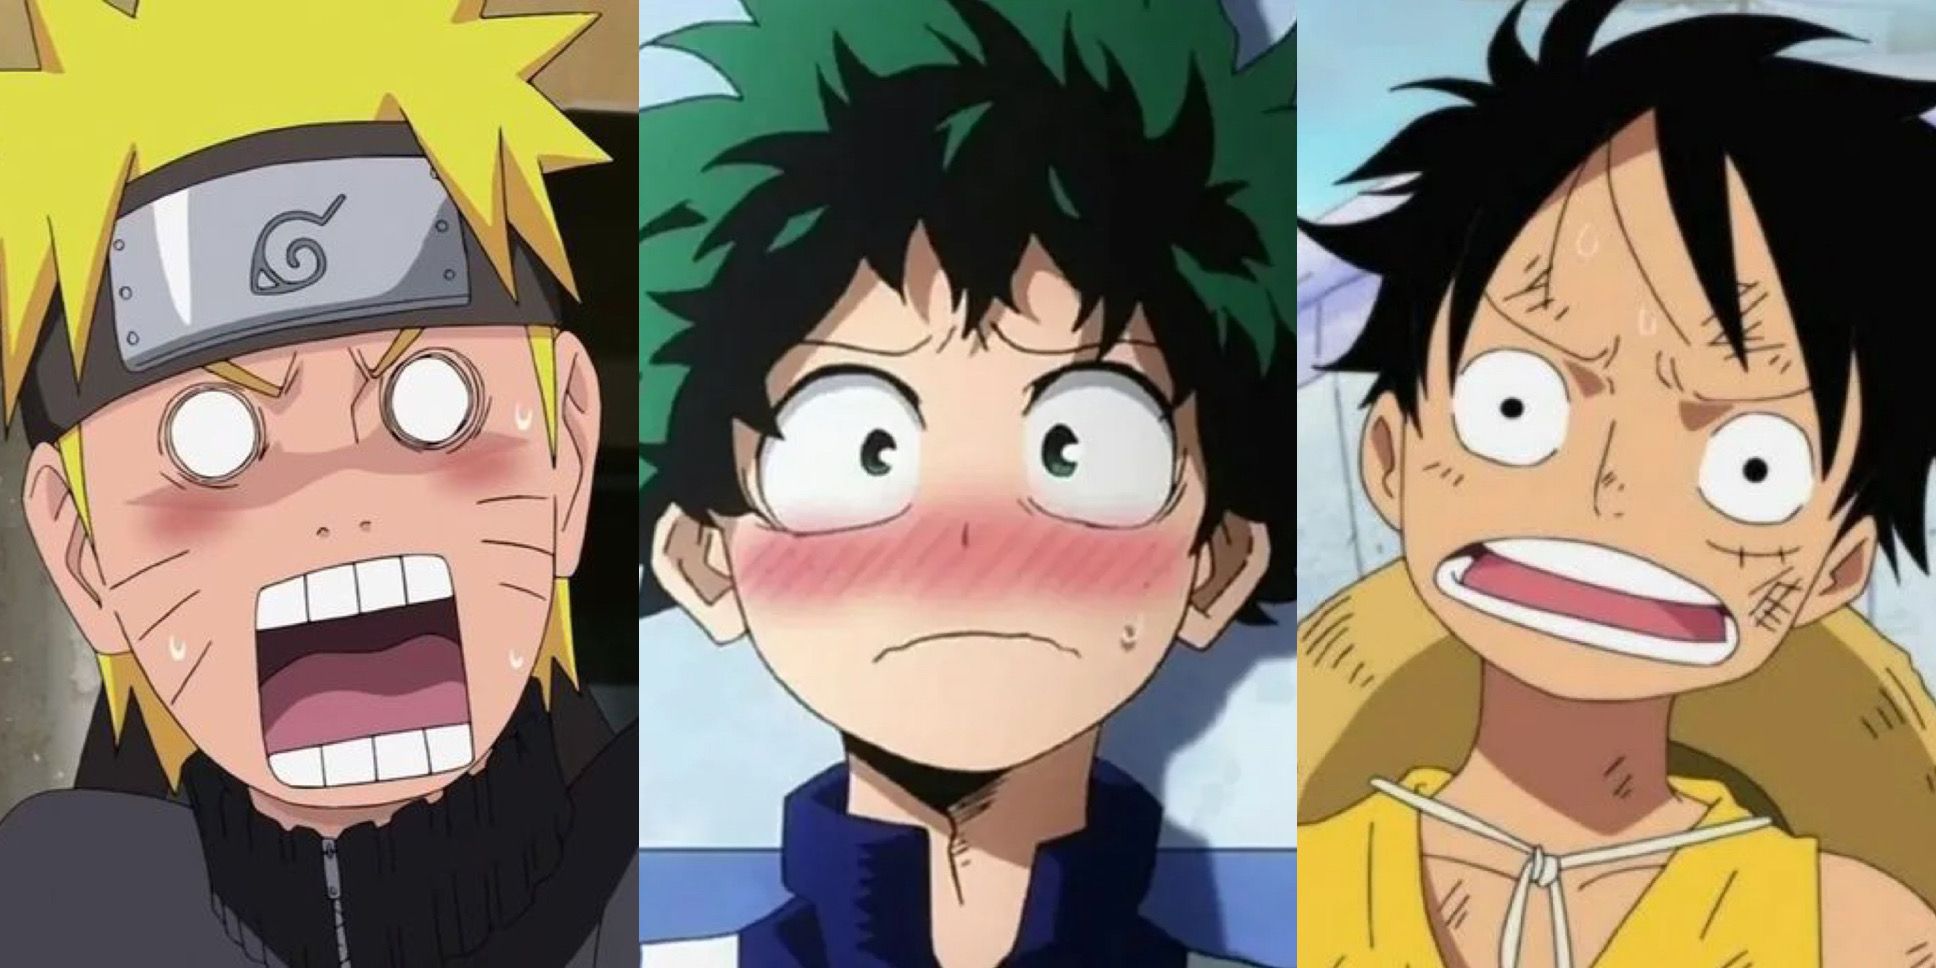 Naruto, Deku from My Hero Academia, and Luffy from One Piece all looking surprised